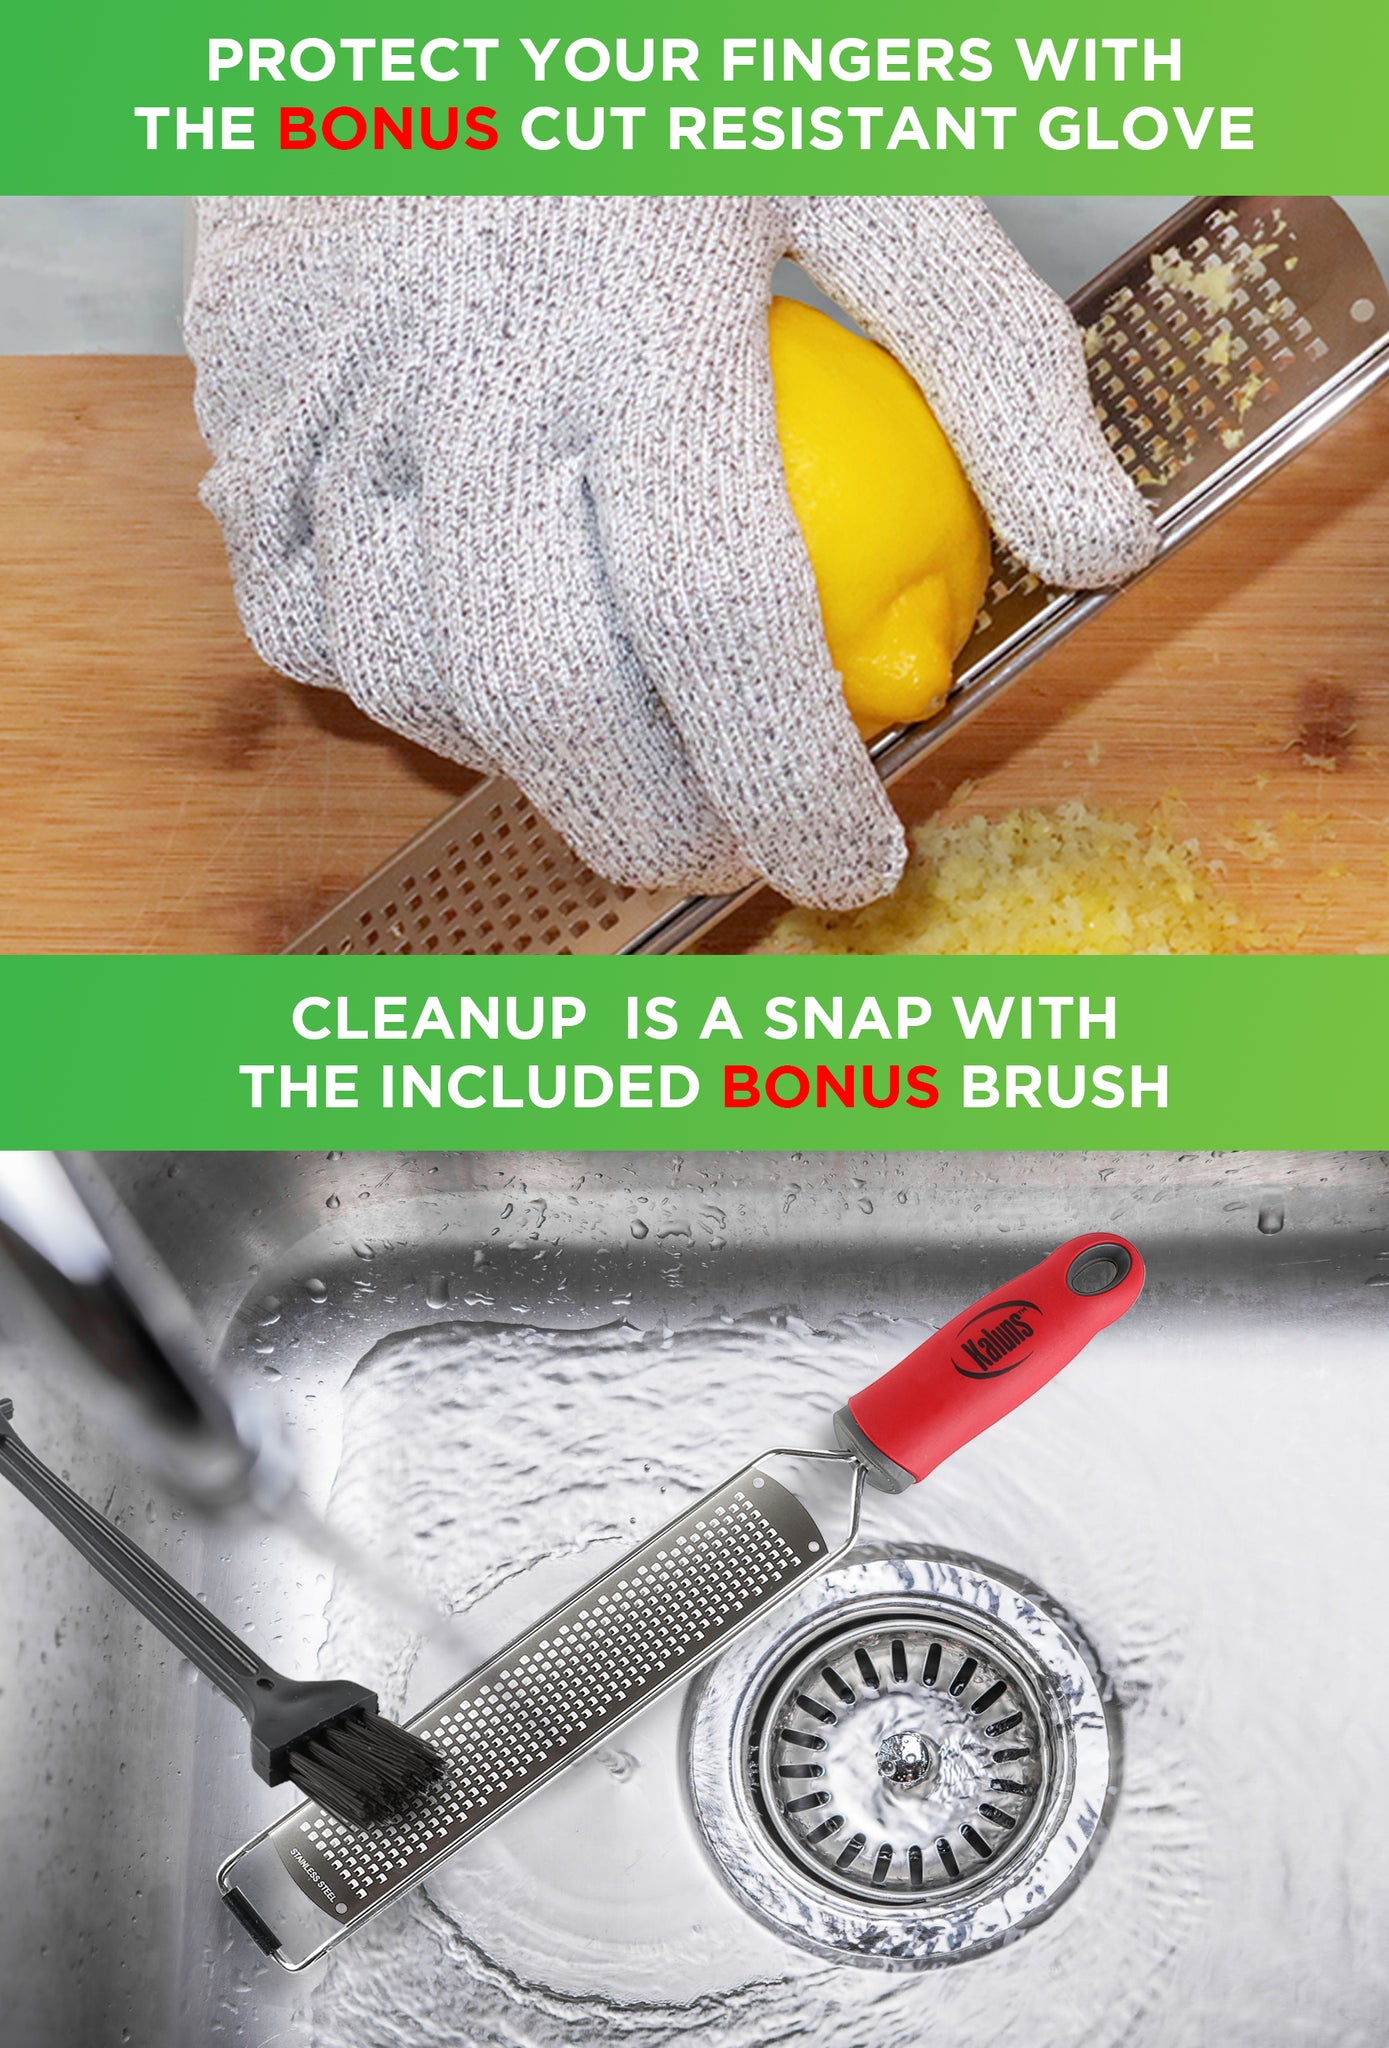 Cheese Grater & Lemon Zester with Protect Cover - Stainless Steel